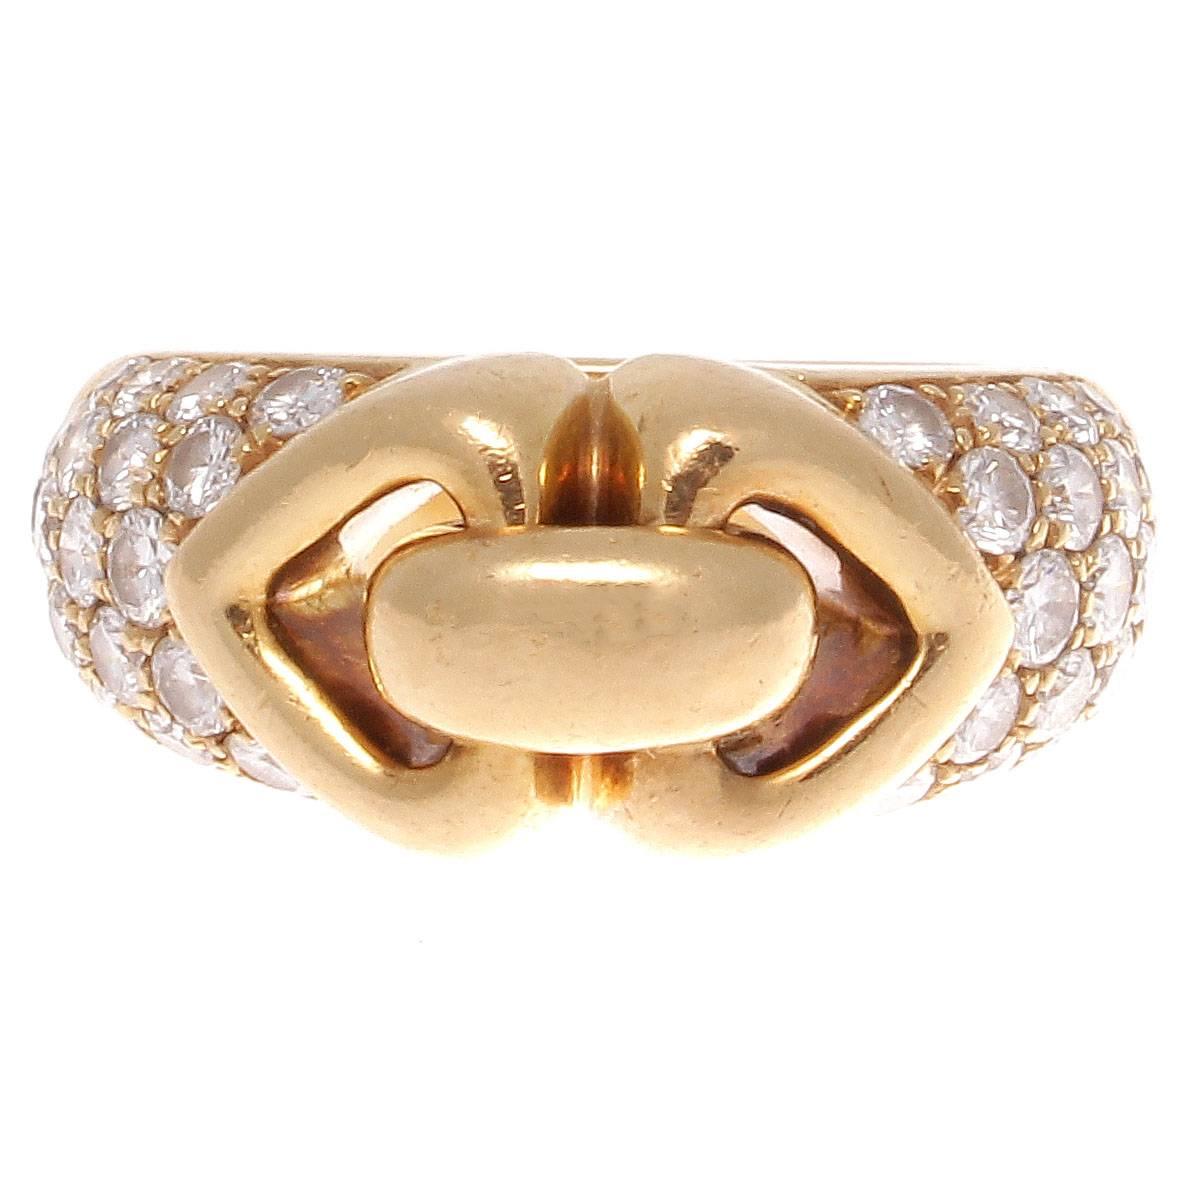 The Bulgari brand stays relevant in the jewelry world with undeniable style and is always in fashion. Featuring 40 diamonds that are D-E color, VVS clarity weighing approximately 1.50 carats. Crafted in 18k yellow gold. Signed Bulgari.

Ring size 6